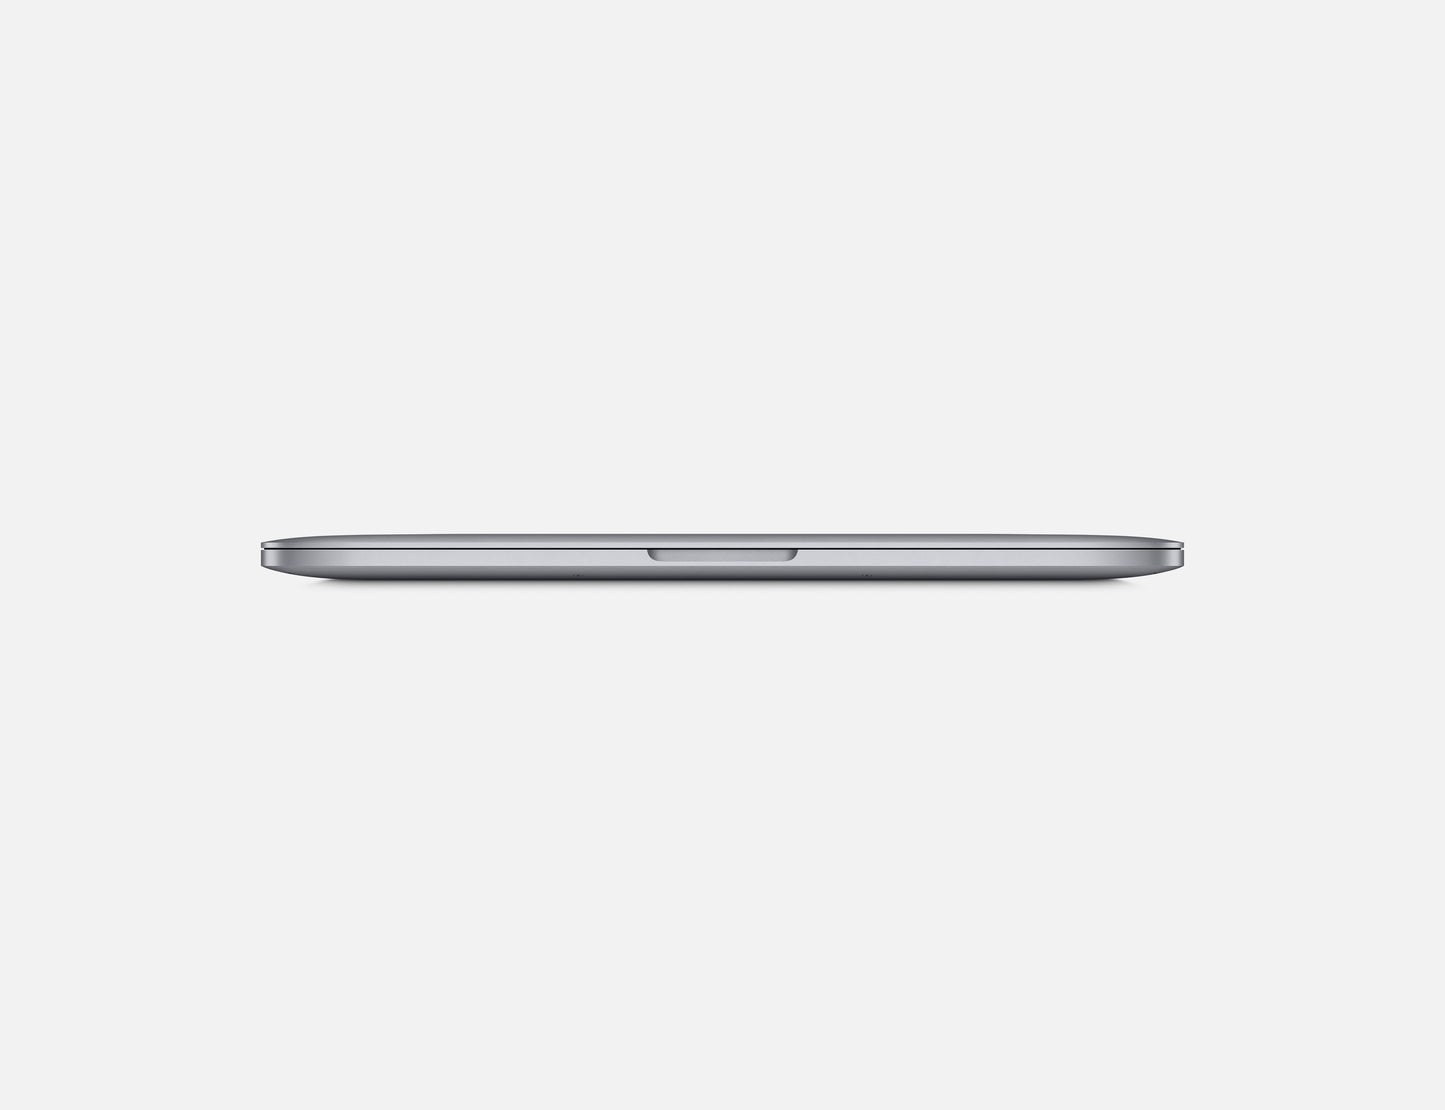 Apple MacBook Pro Touch Bar A1706 13" i5 16GB RAM, 512 SSD 2017,Silver/ Space Gray